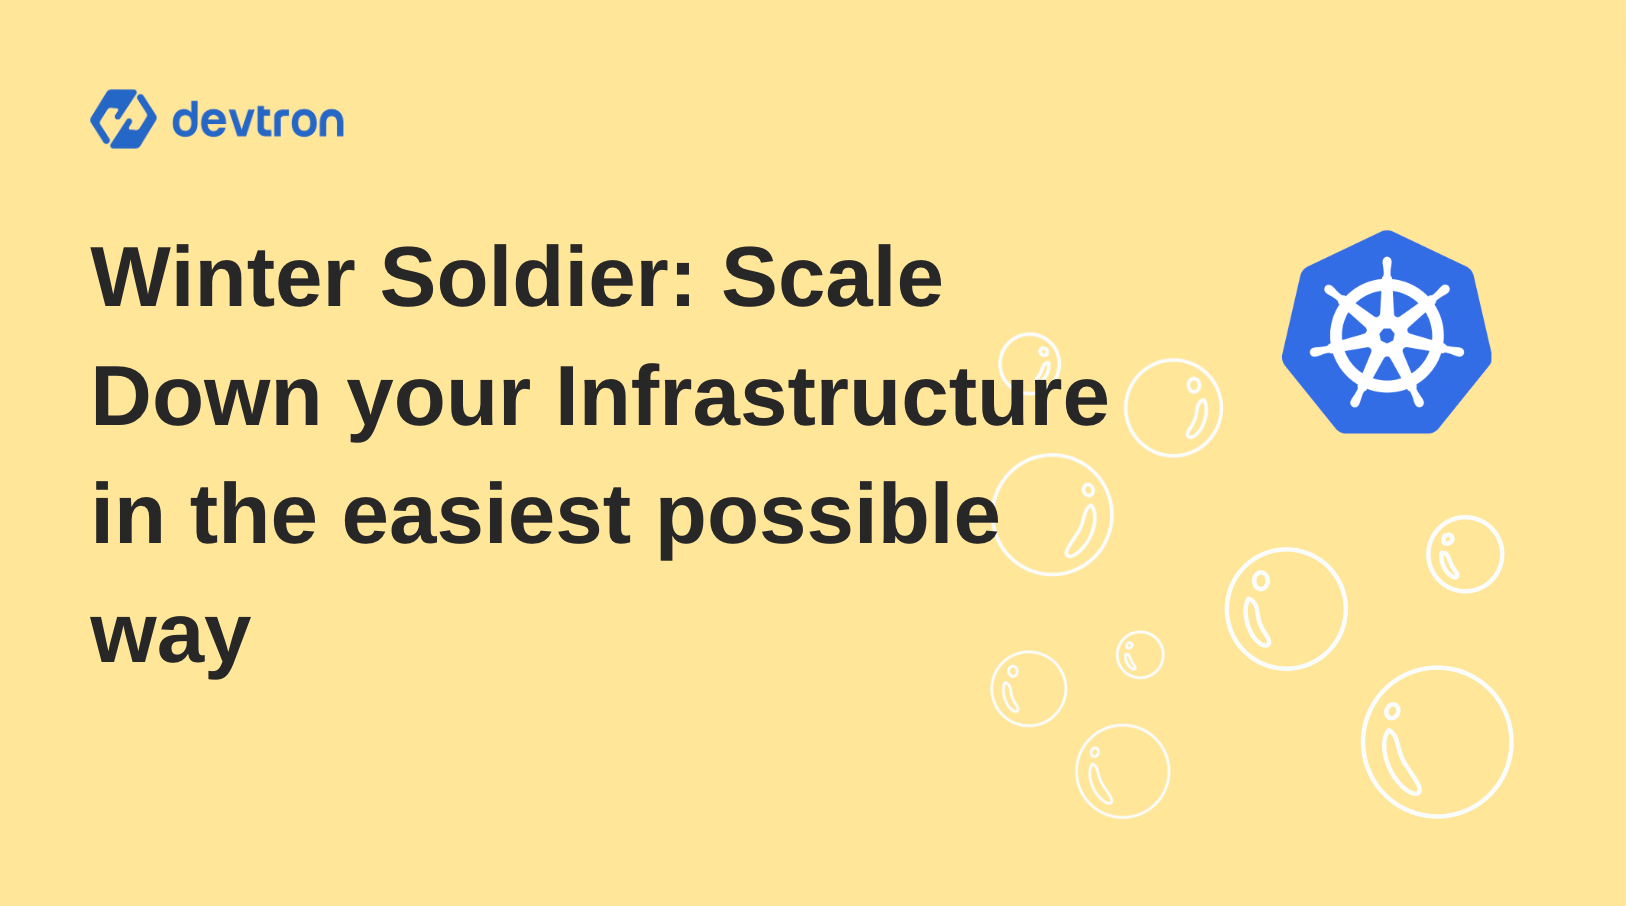 Winter Soldier: Scale down your Infrastructure in the easiest possible way